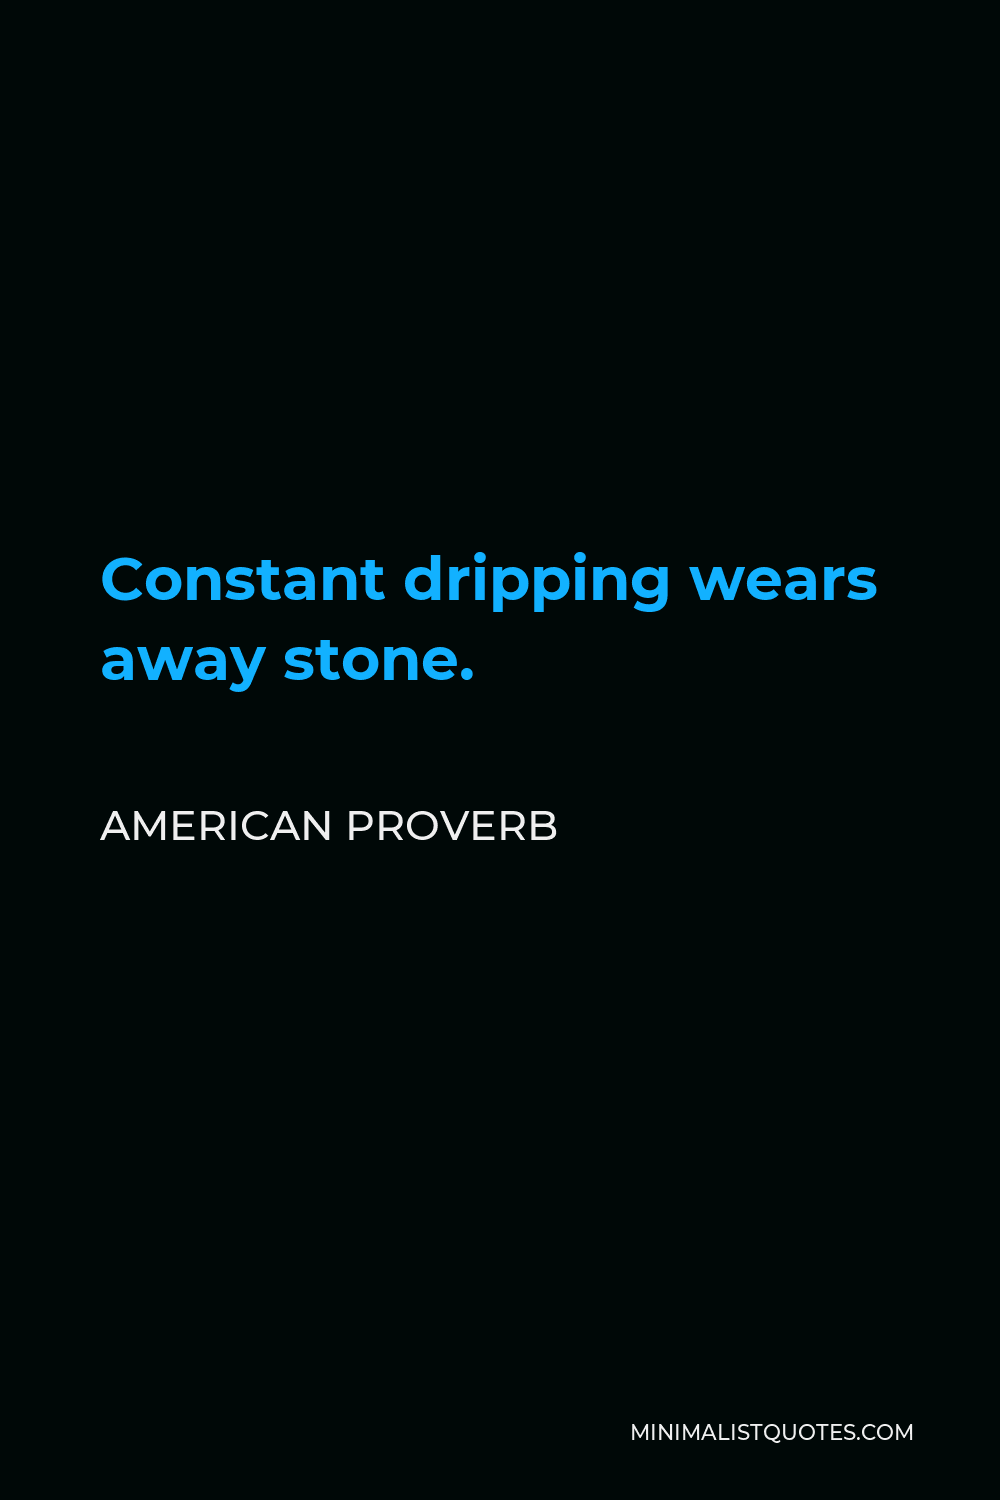 American Proverb Quote - Constant dripping wears away stone.